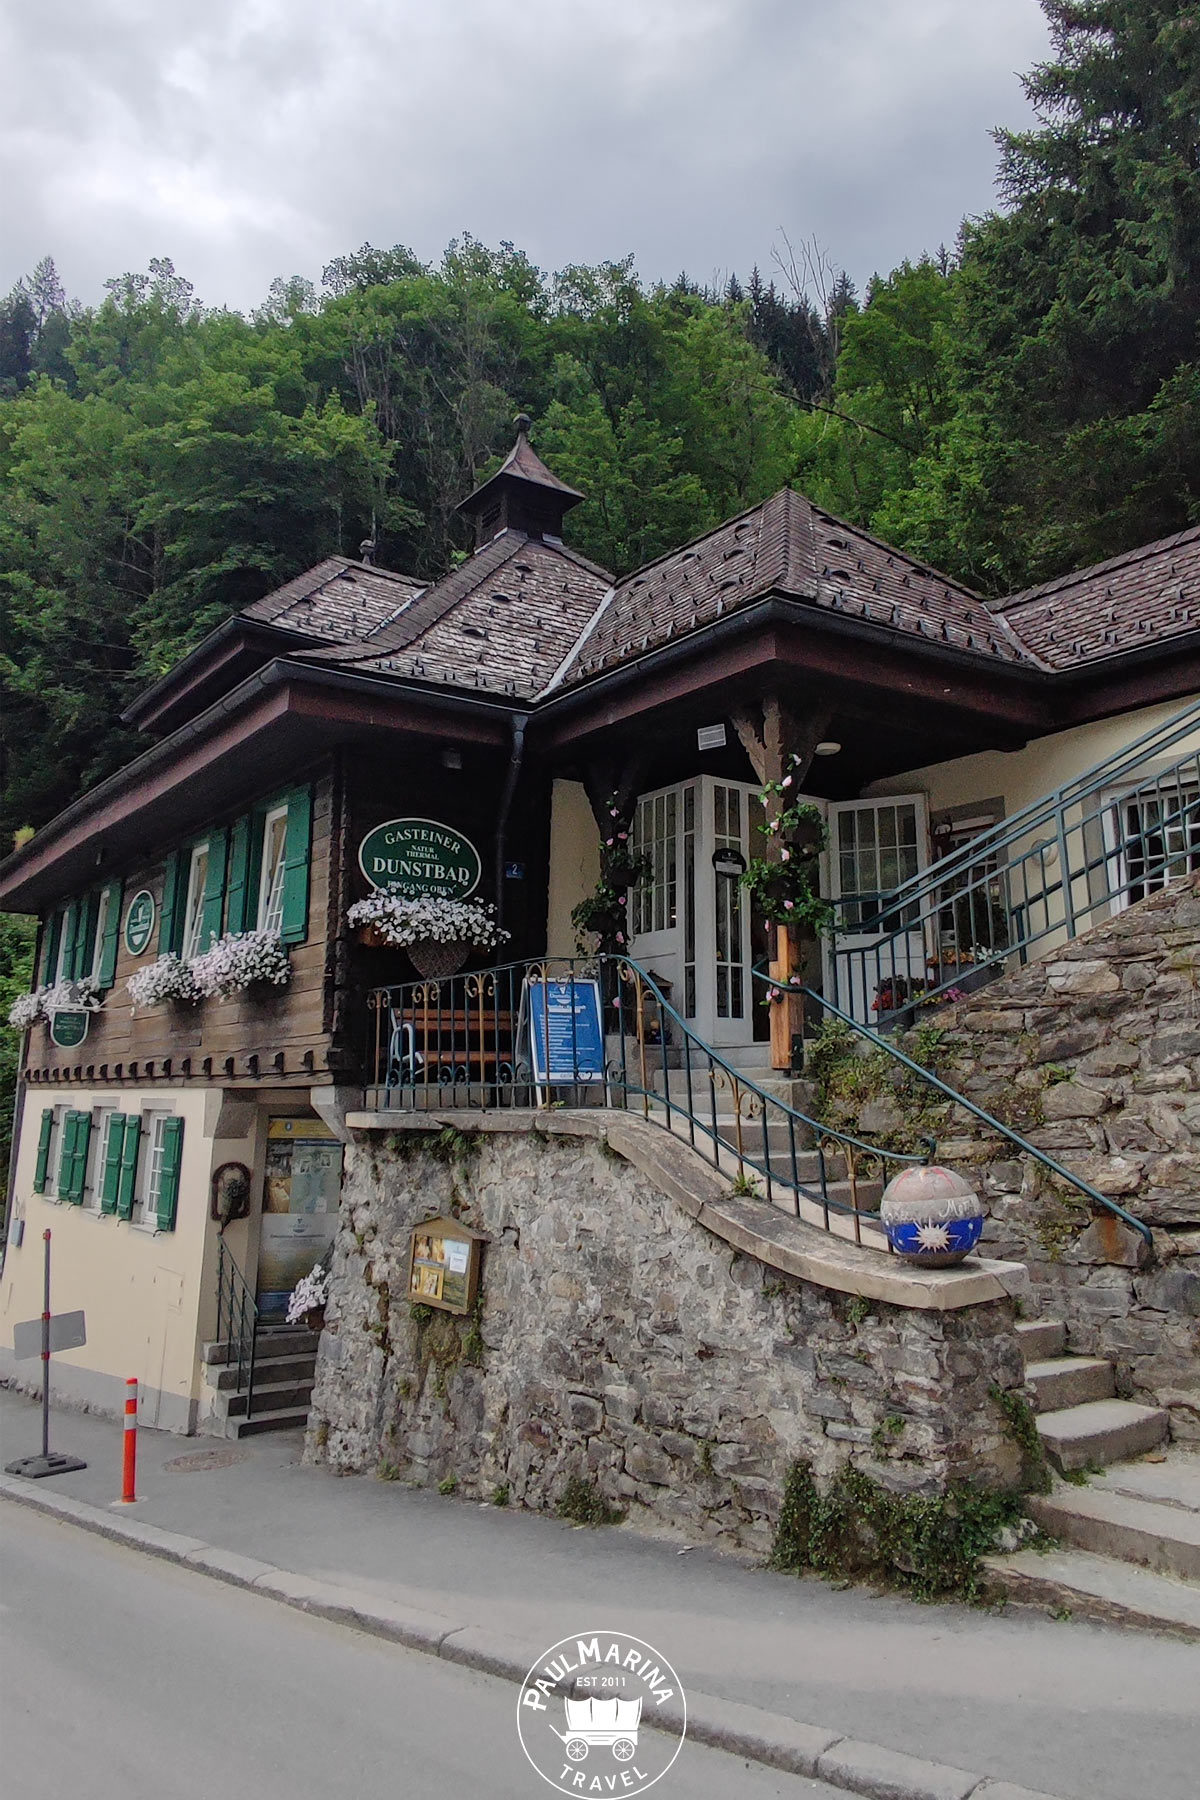 One of the specialized treatment centers in Bad Gastein